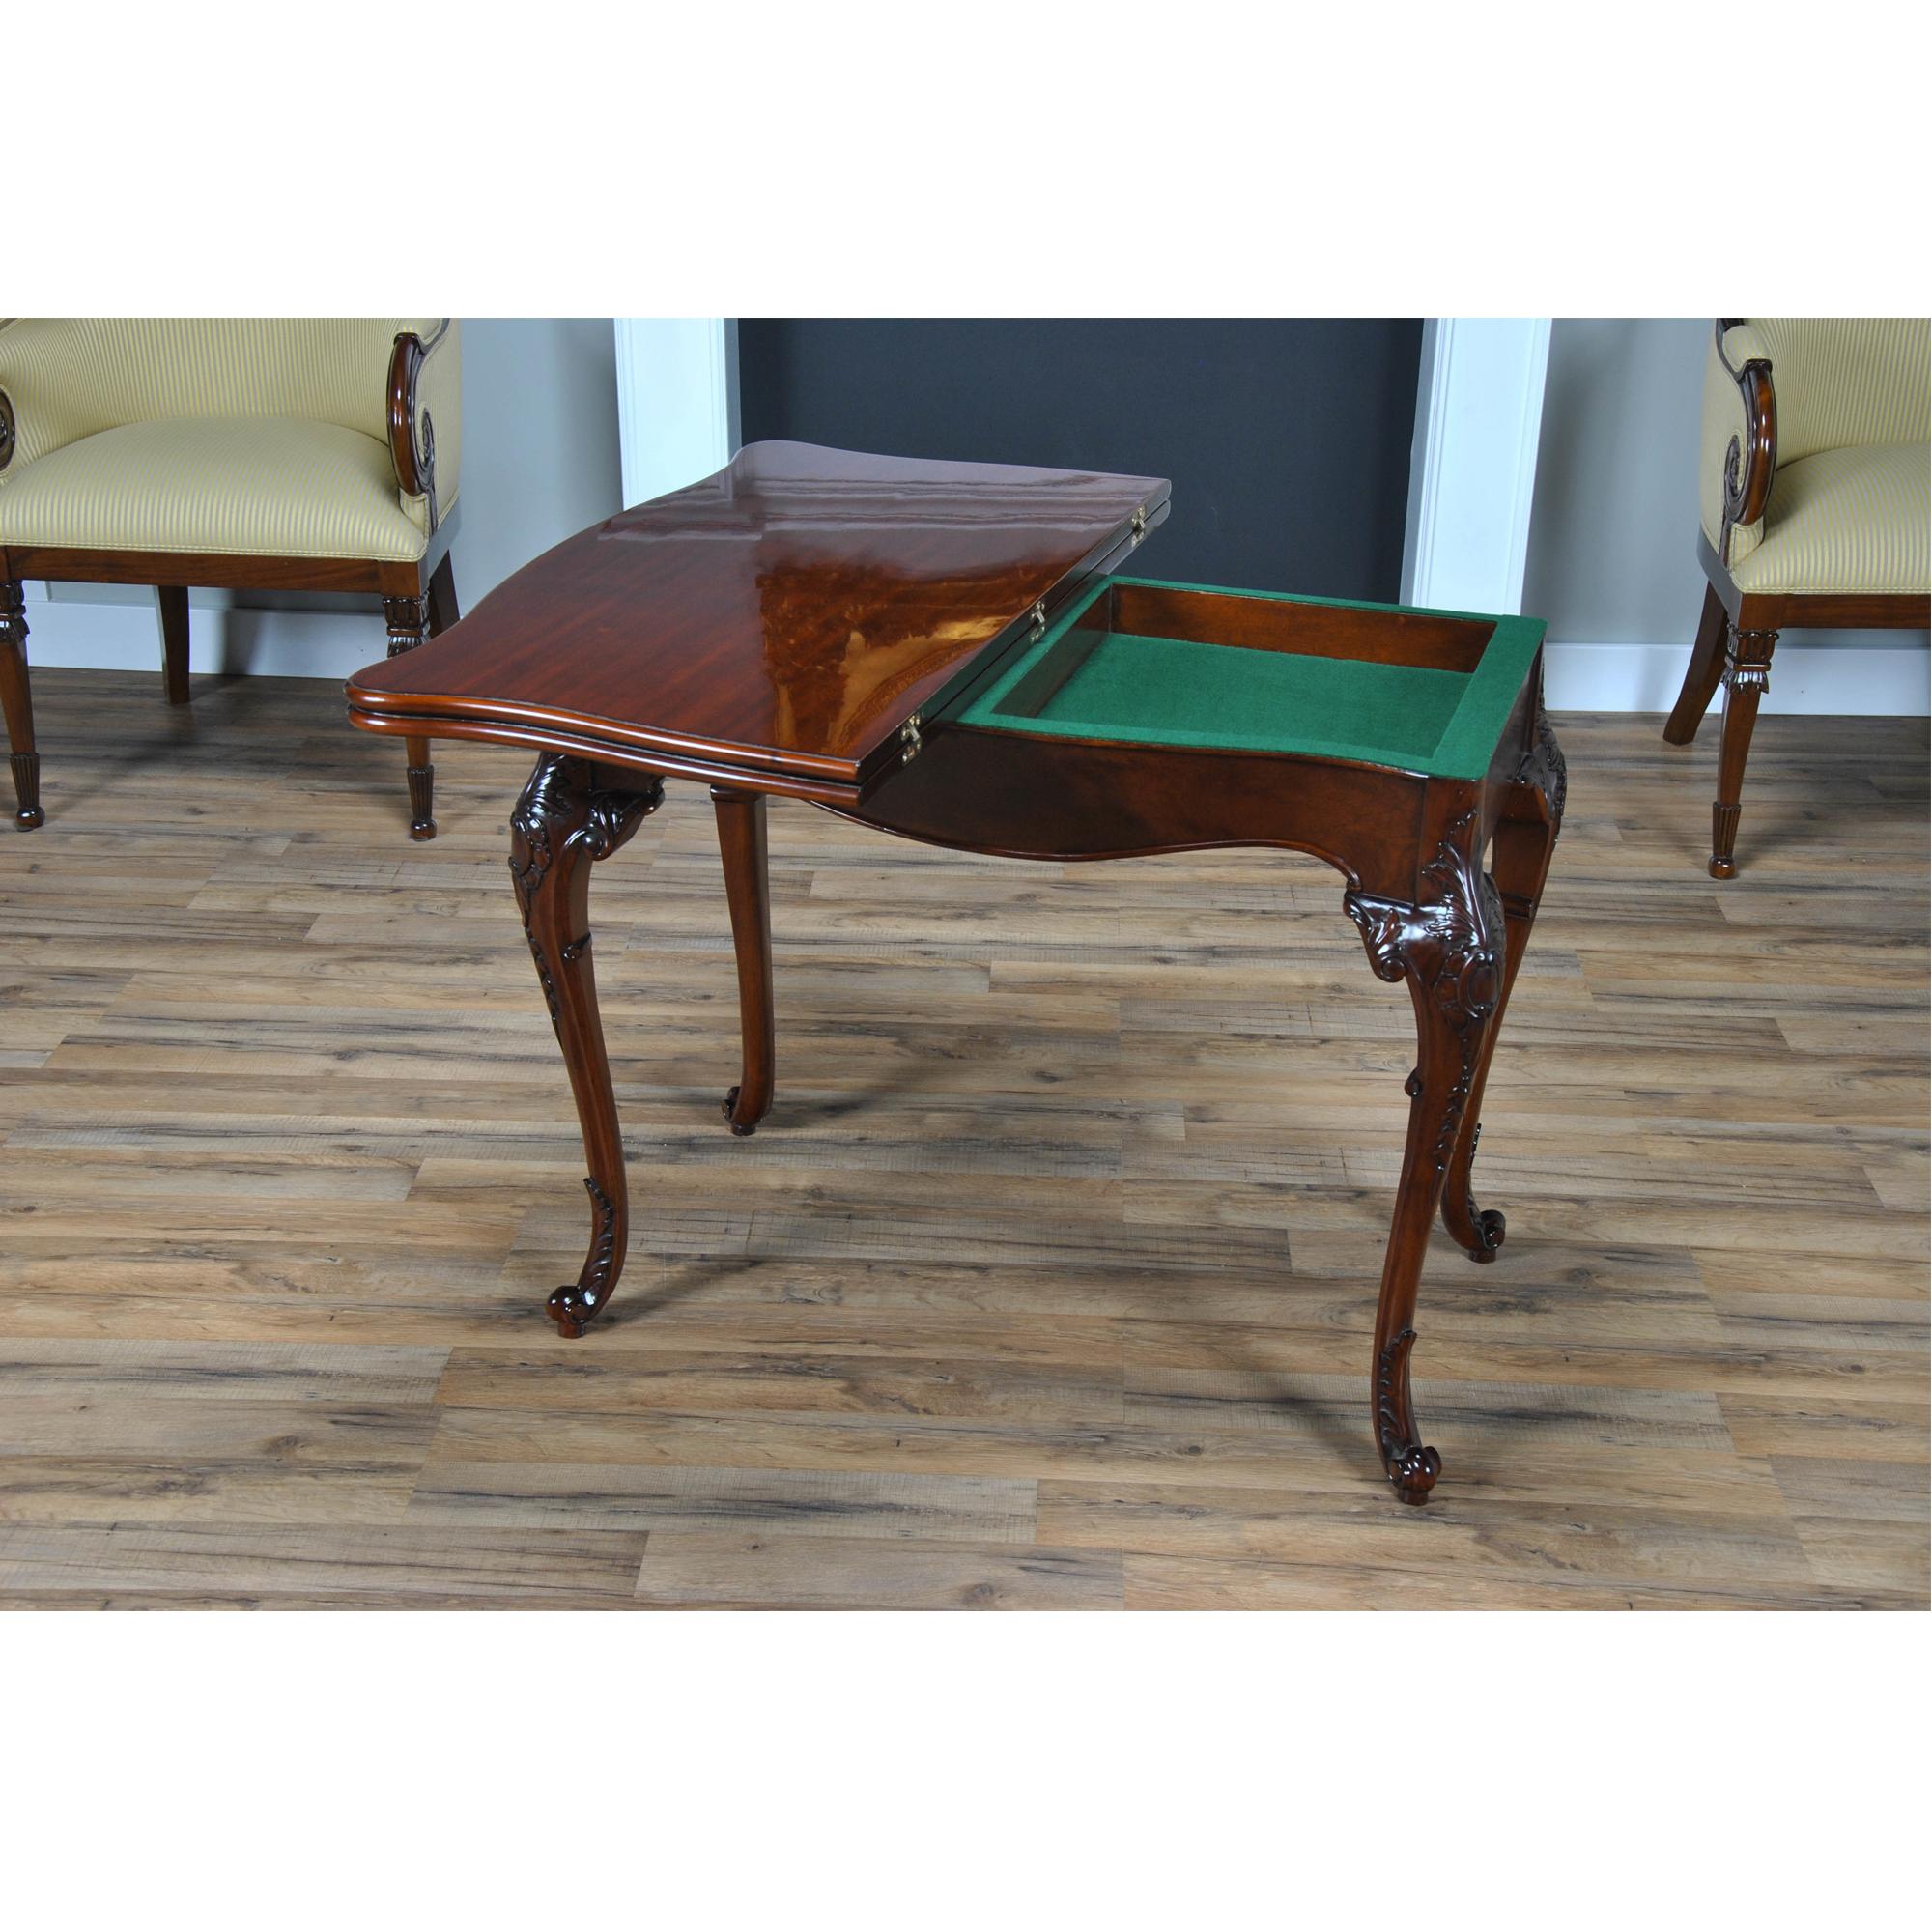 This large Mahogany French Game Table has a serpentine shaped top with fine quality mahogany grain and a crisply molded edge. Designed after an antique original our reproduction Mahogany French Game Table has all of the features that made the old